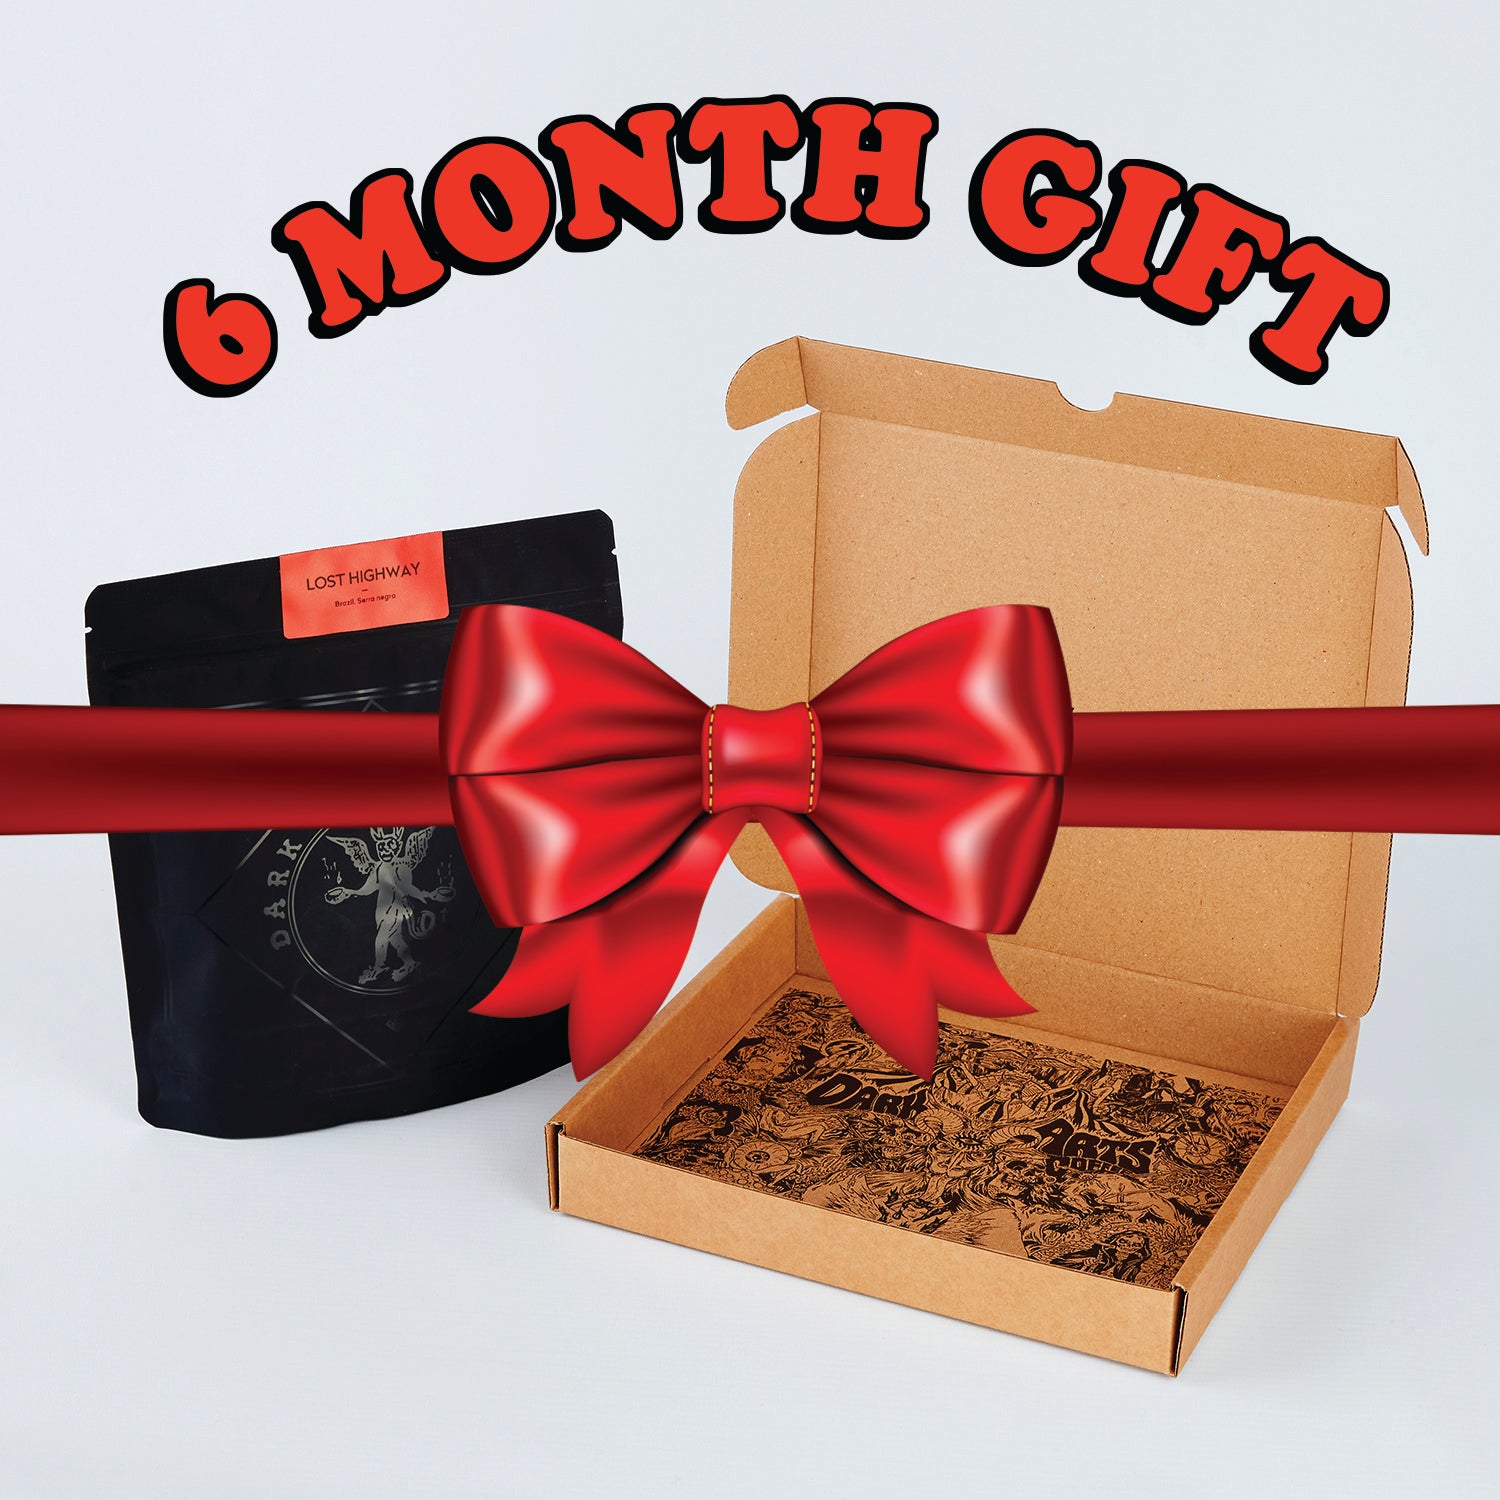 6 MONTH GIFT SUBSCRIPTION